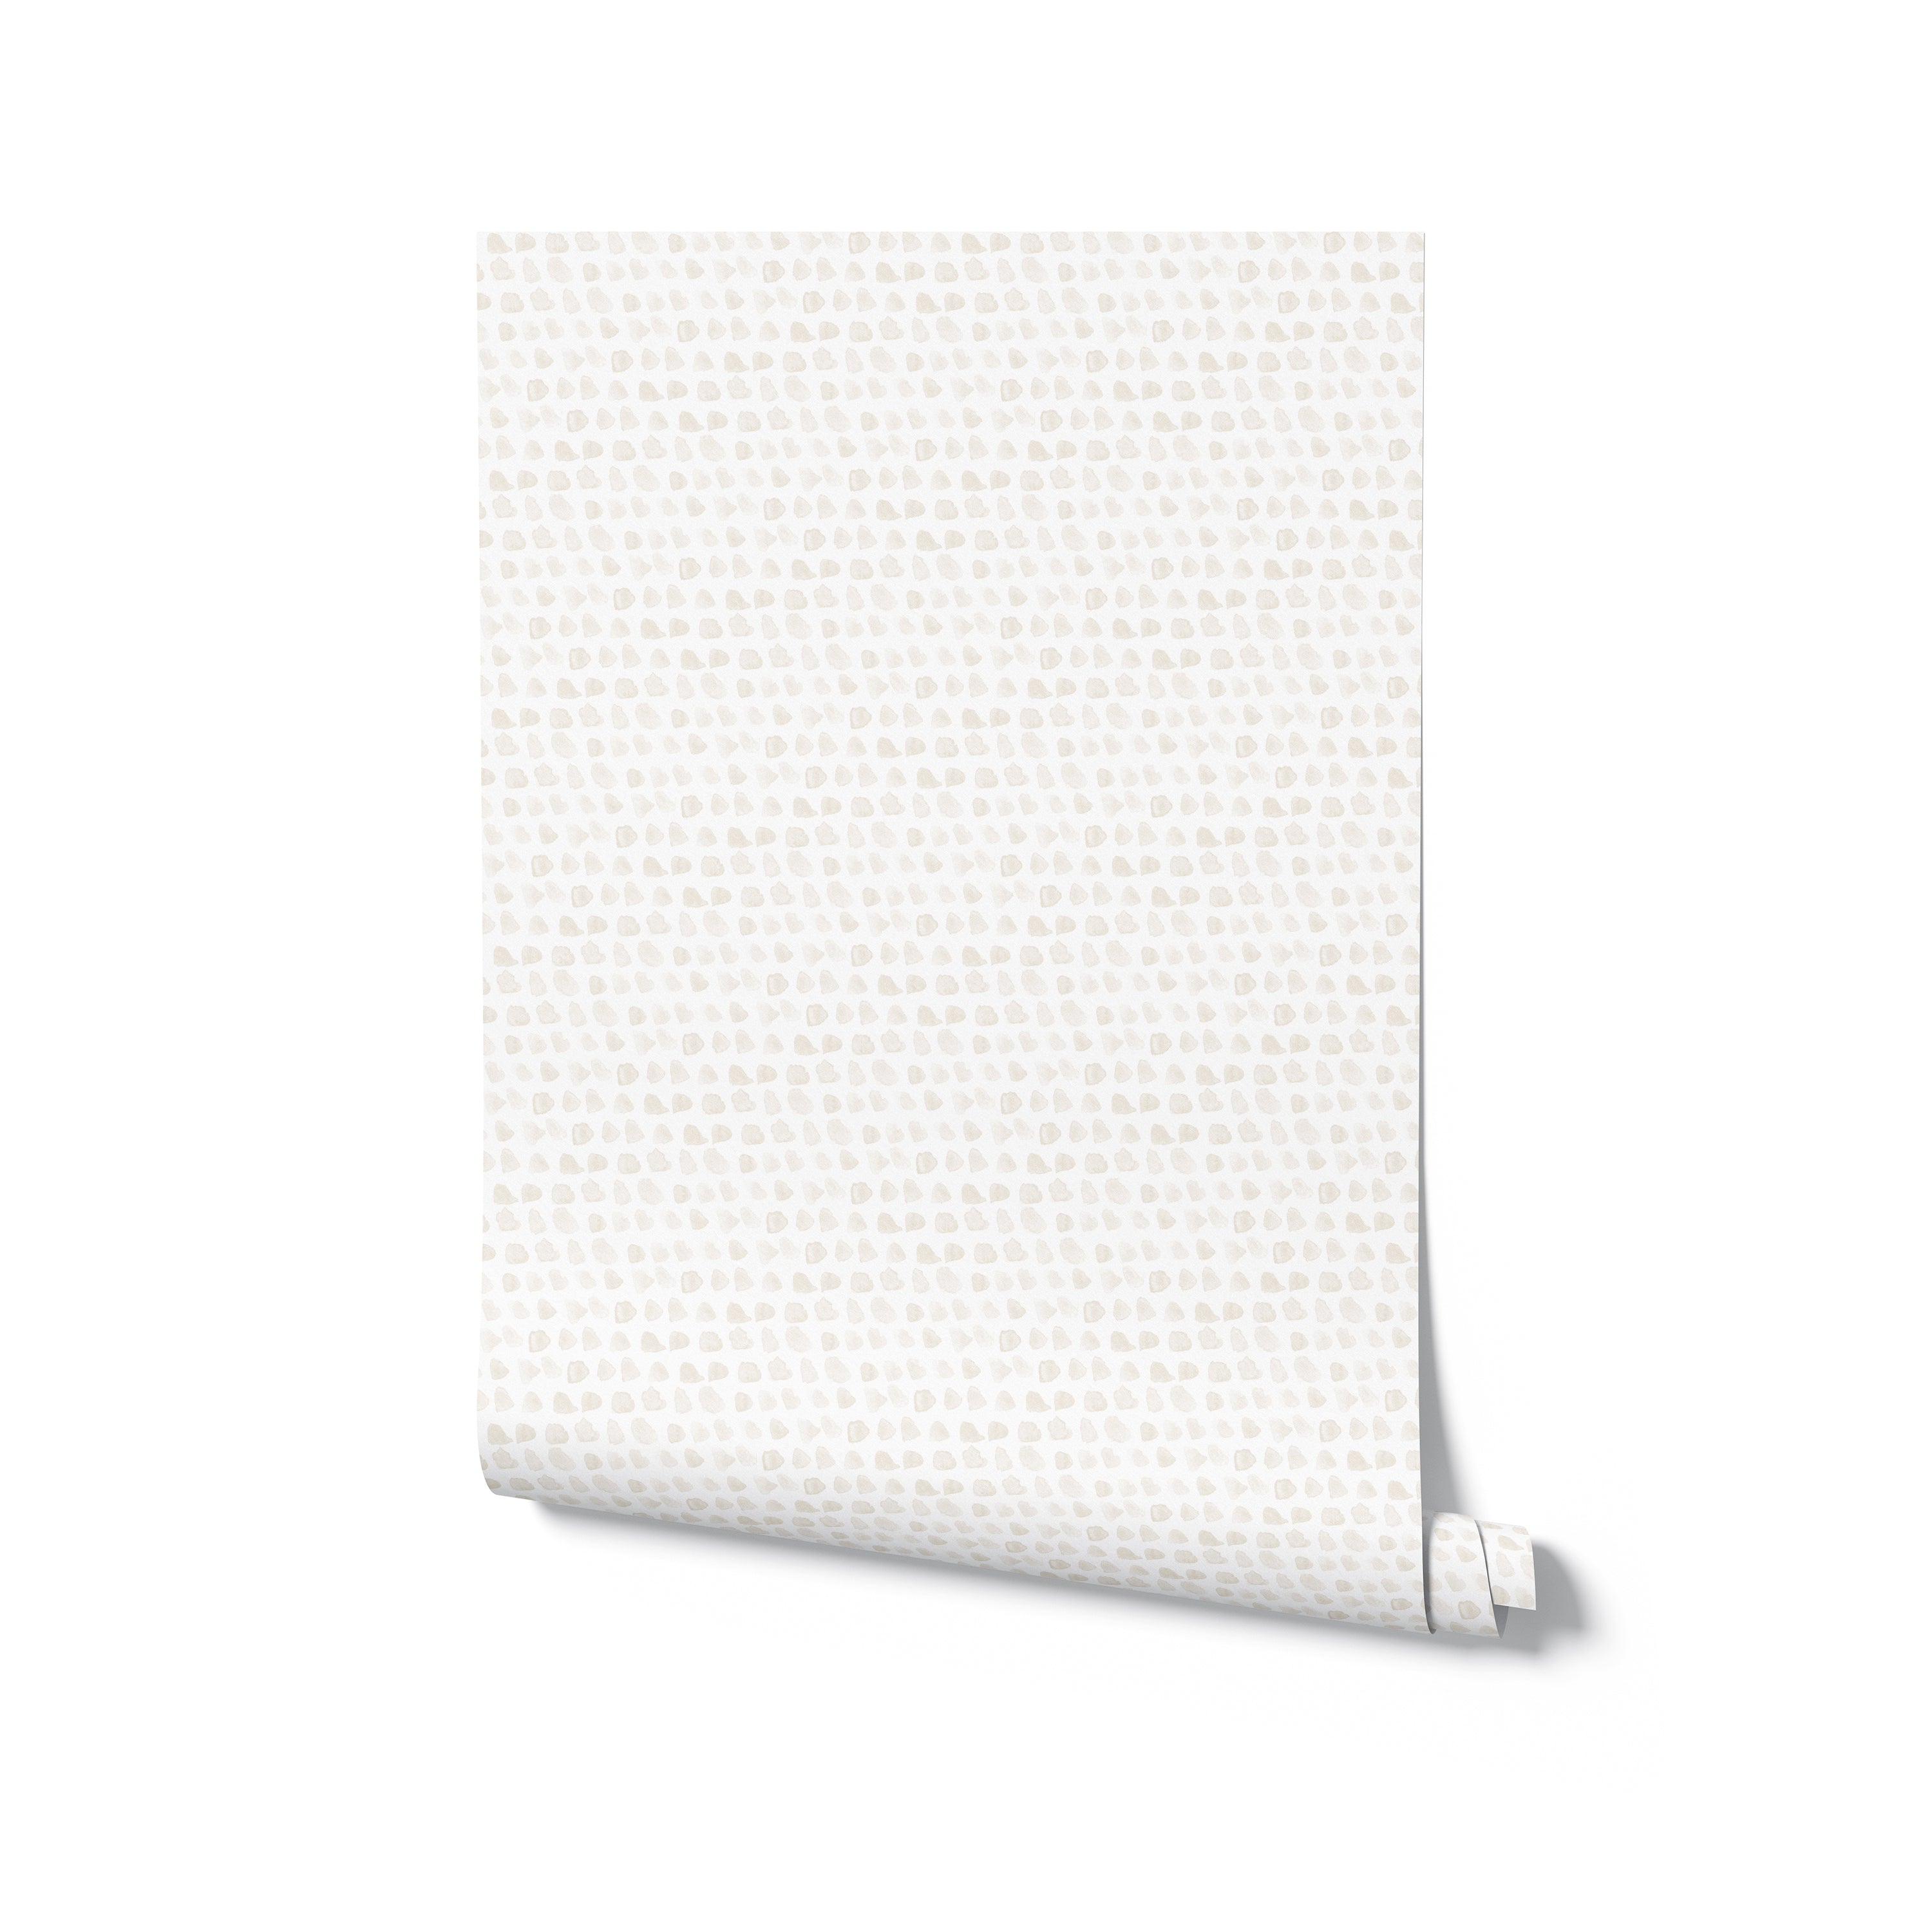 A realistic mockup of the Handpainted Dots Wallpaper rolled up and standing against a white background. The wallpaper features a delicate pattern of painted dots on a ecru surface, illustrating the wallpaper's texture and color as it would appear when applied to a wall.